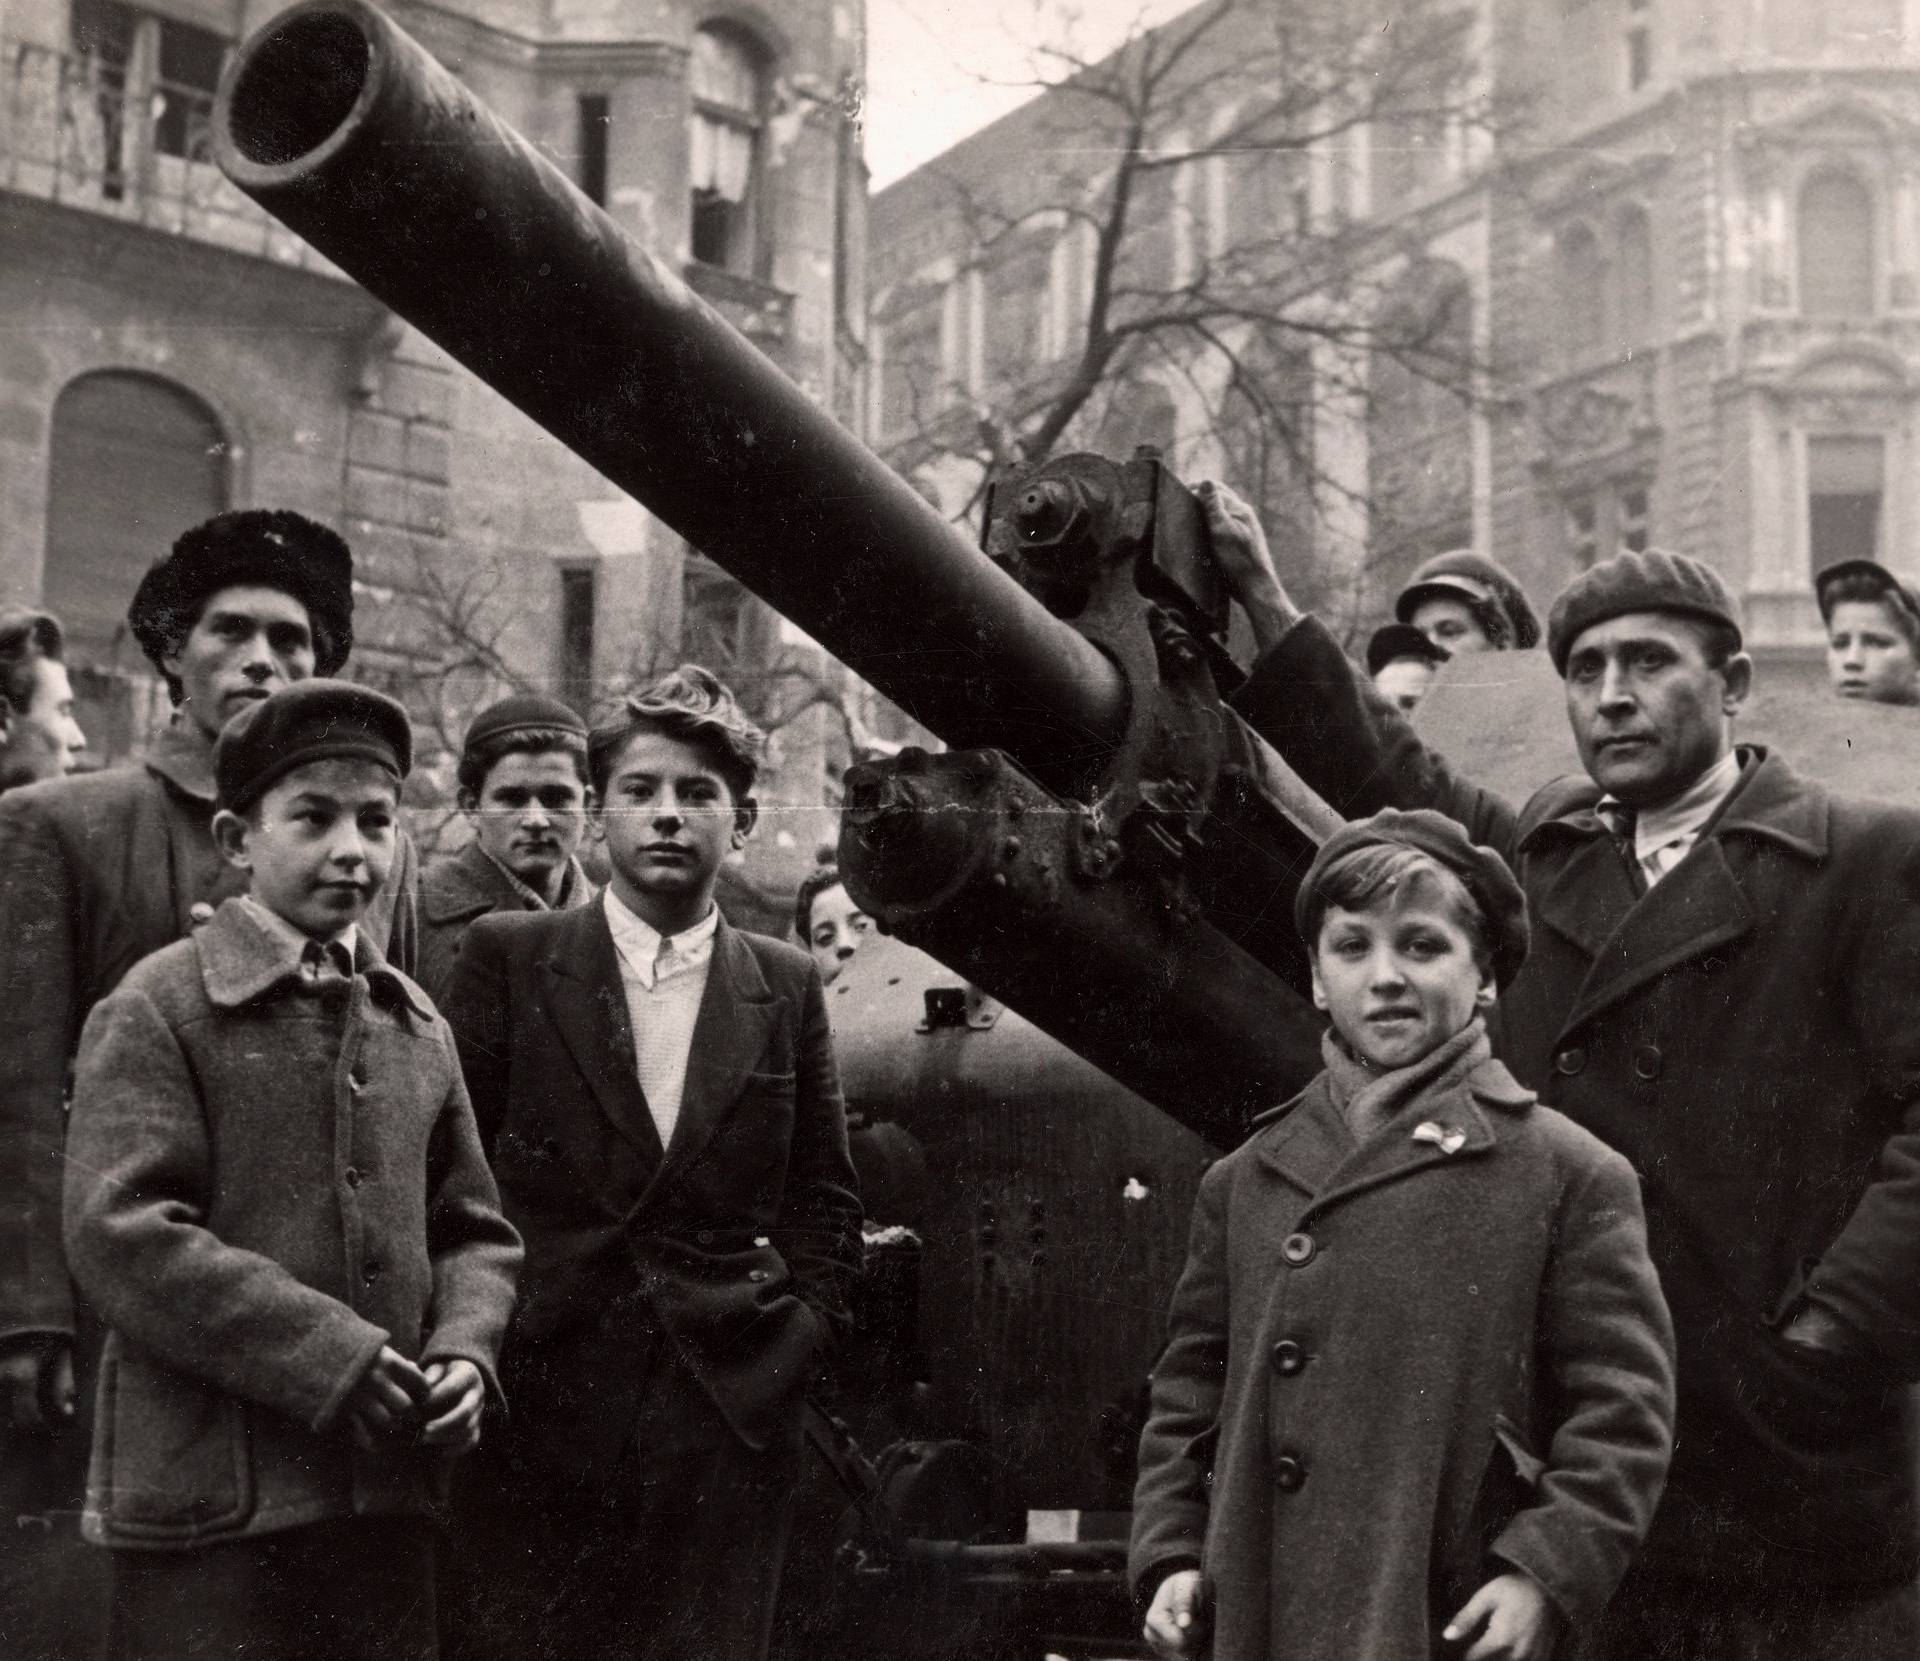 Fighters stand next to a Soviet tank on the streets of Budapest at the time of the uprising against the Soviet-supported Hungarian communist regime in 1956